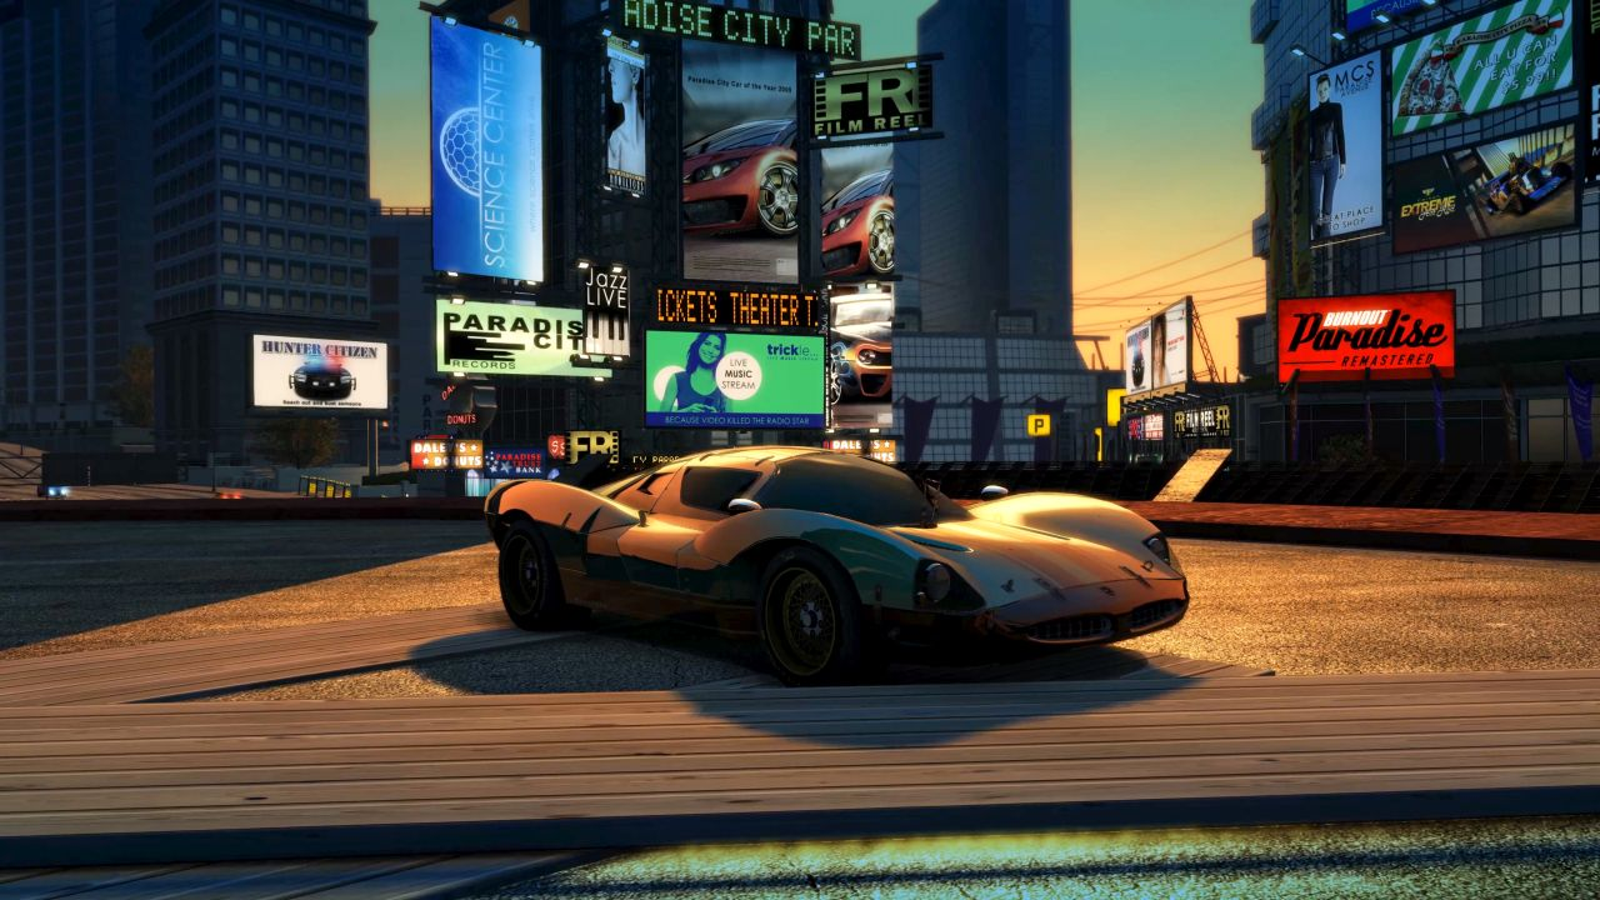 Try Burnout Paradise on PC, For Free